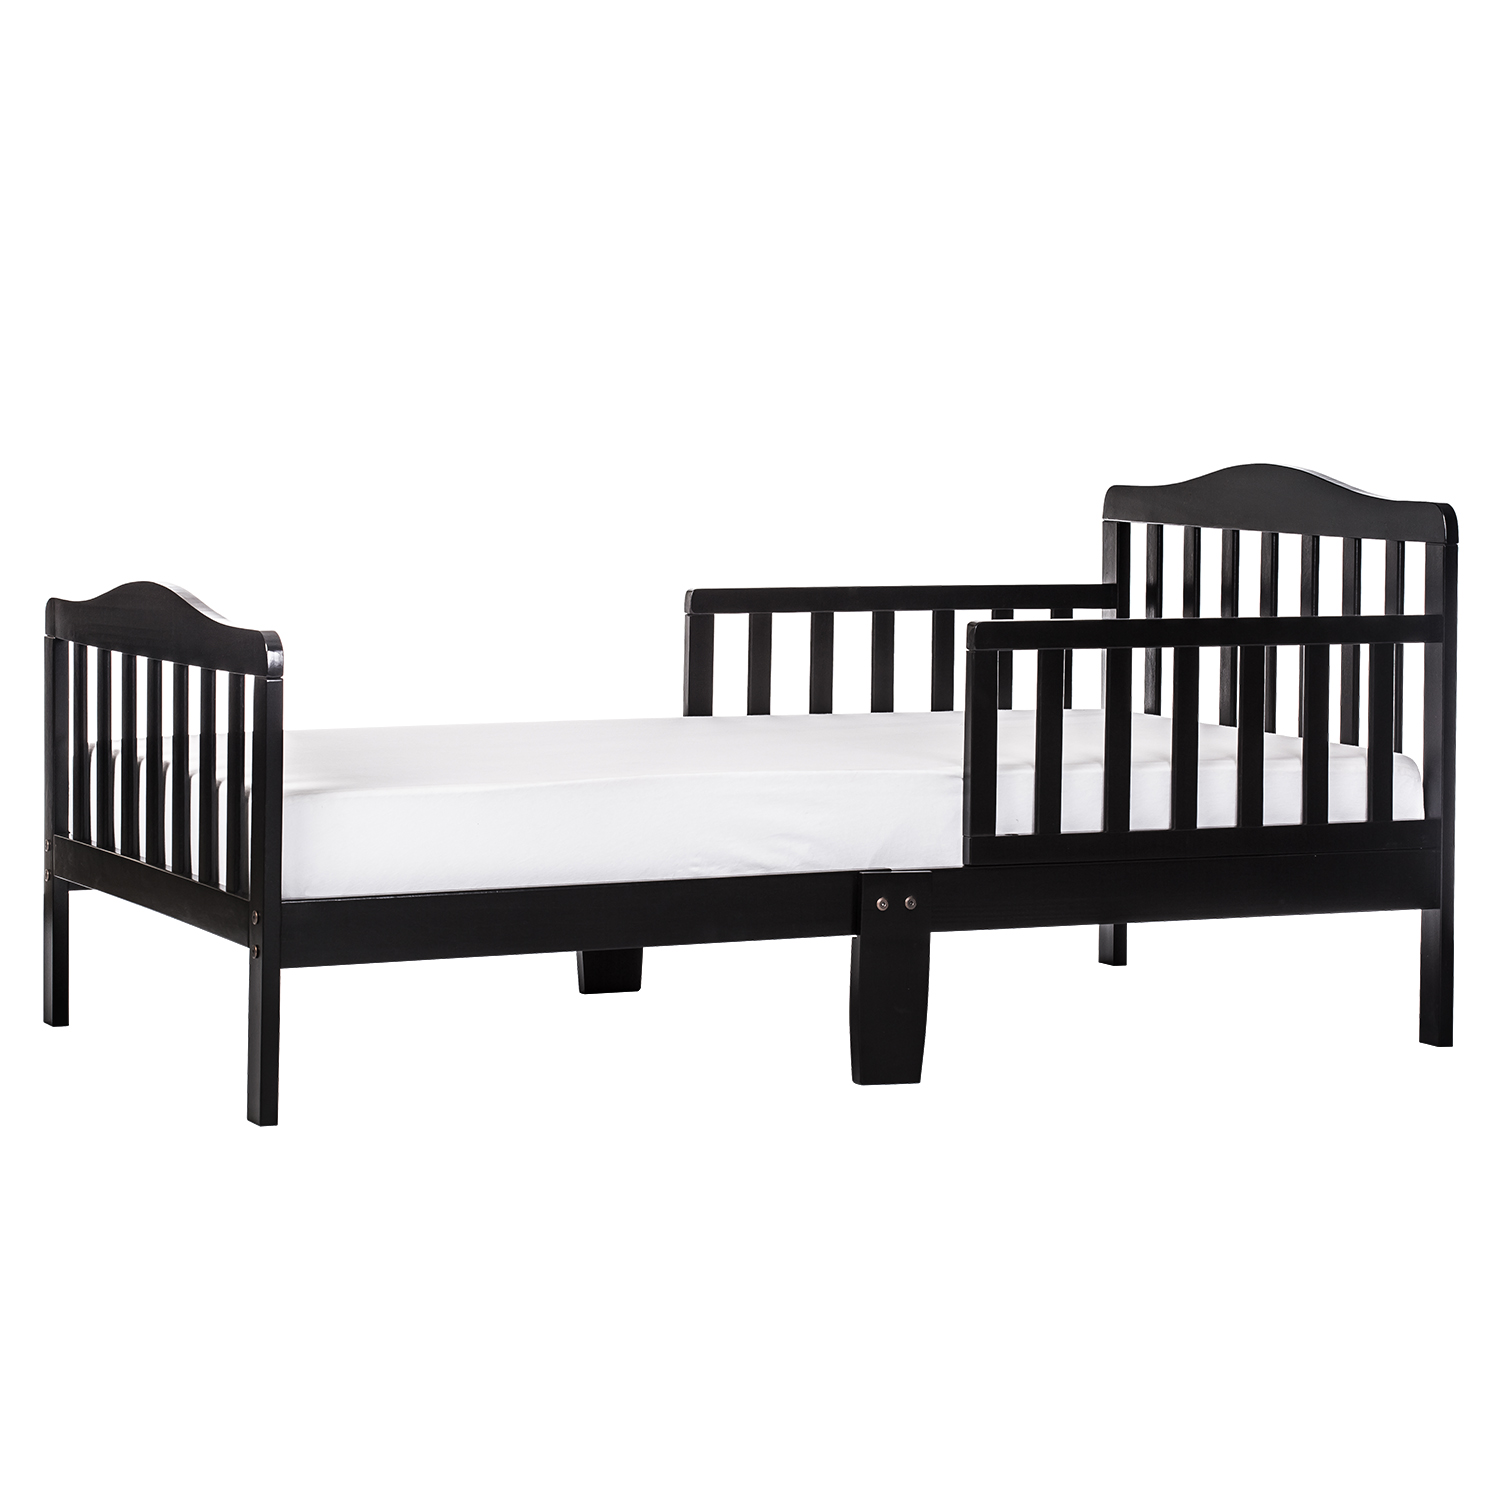 Dream On Me Classic Design Toddler Bed, Black - image 8 of 10